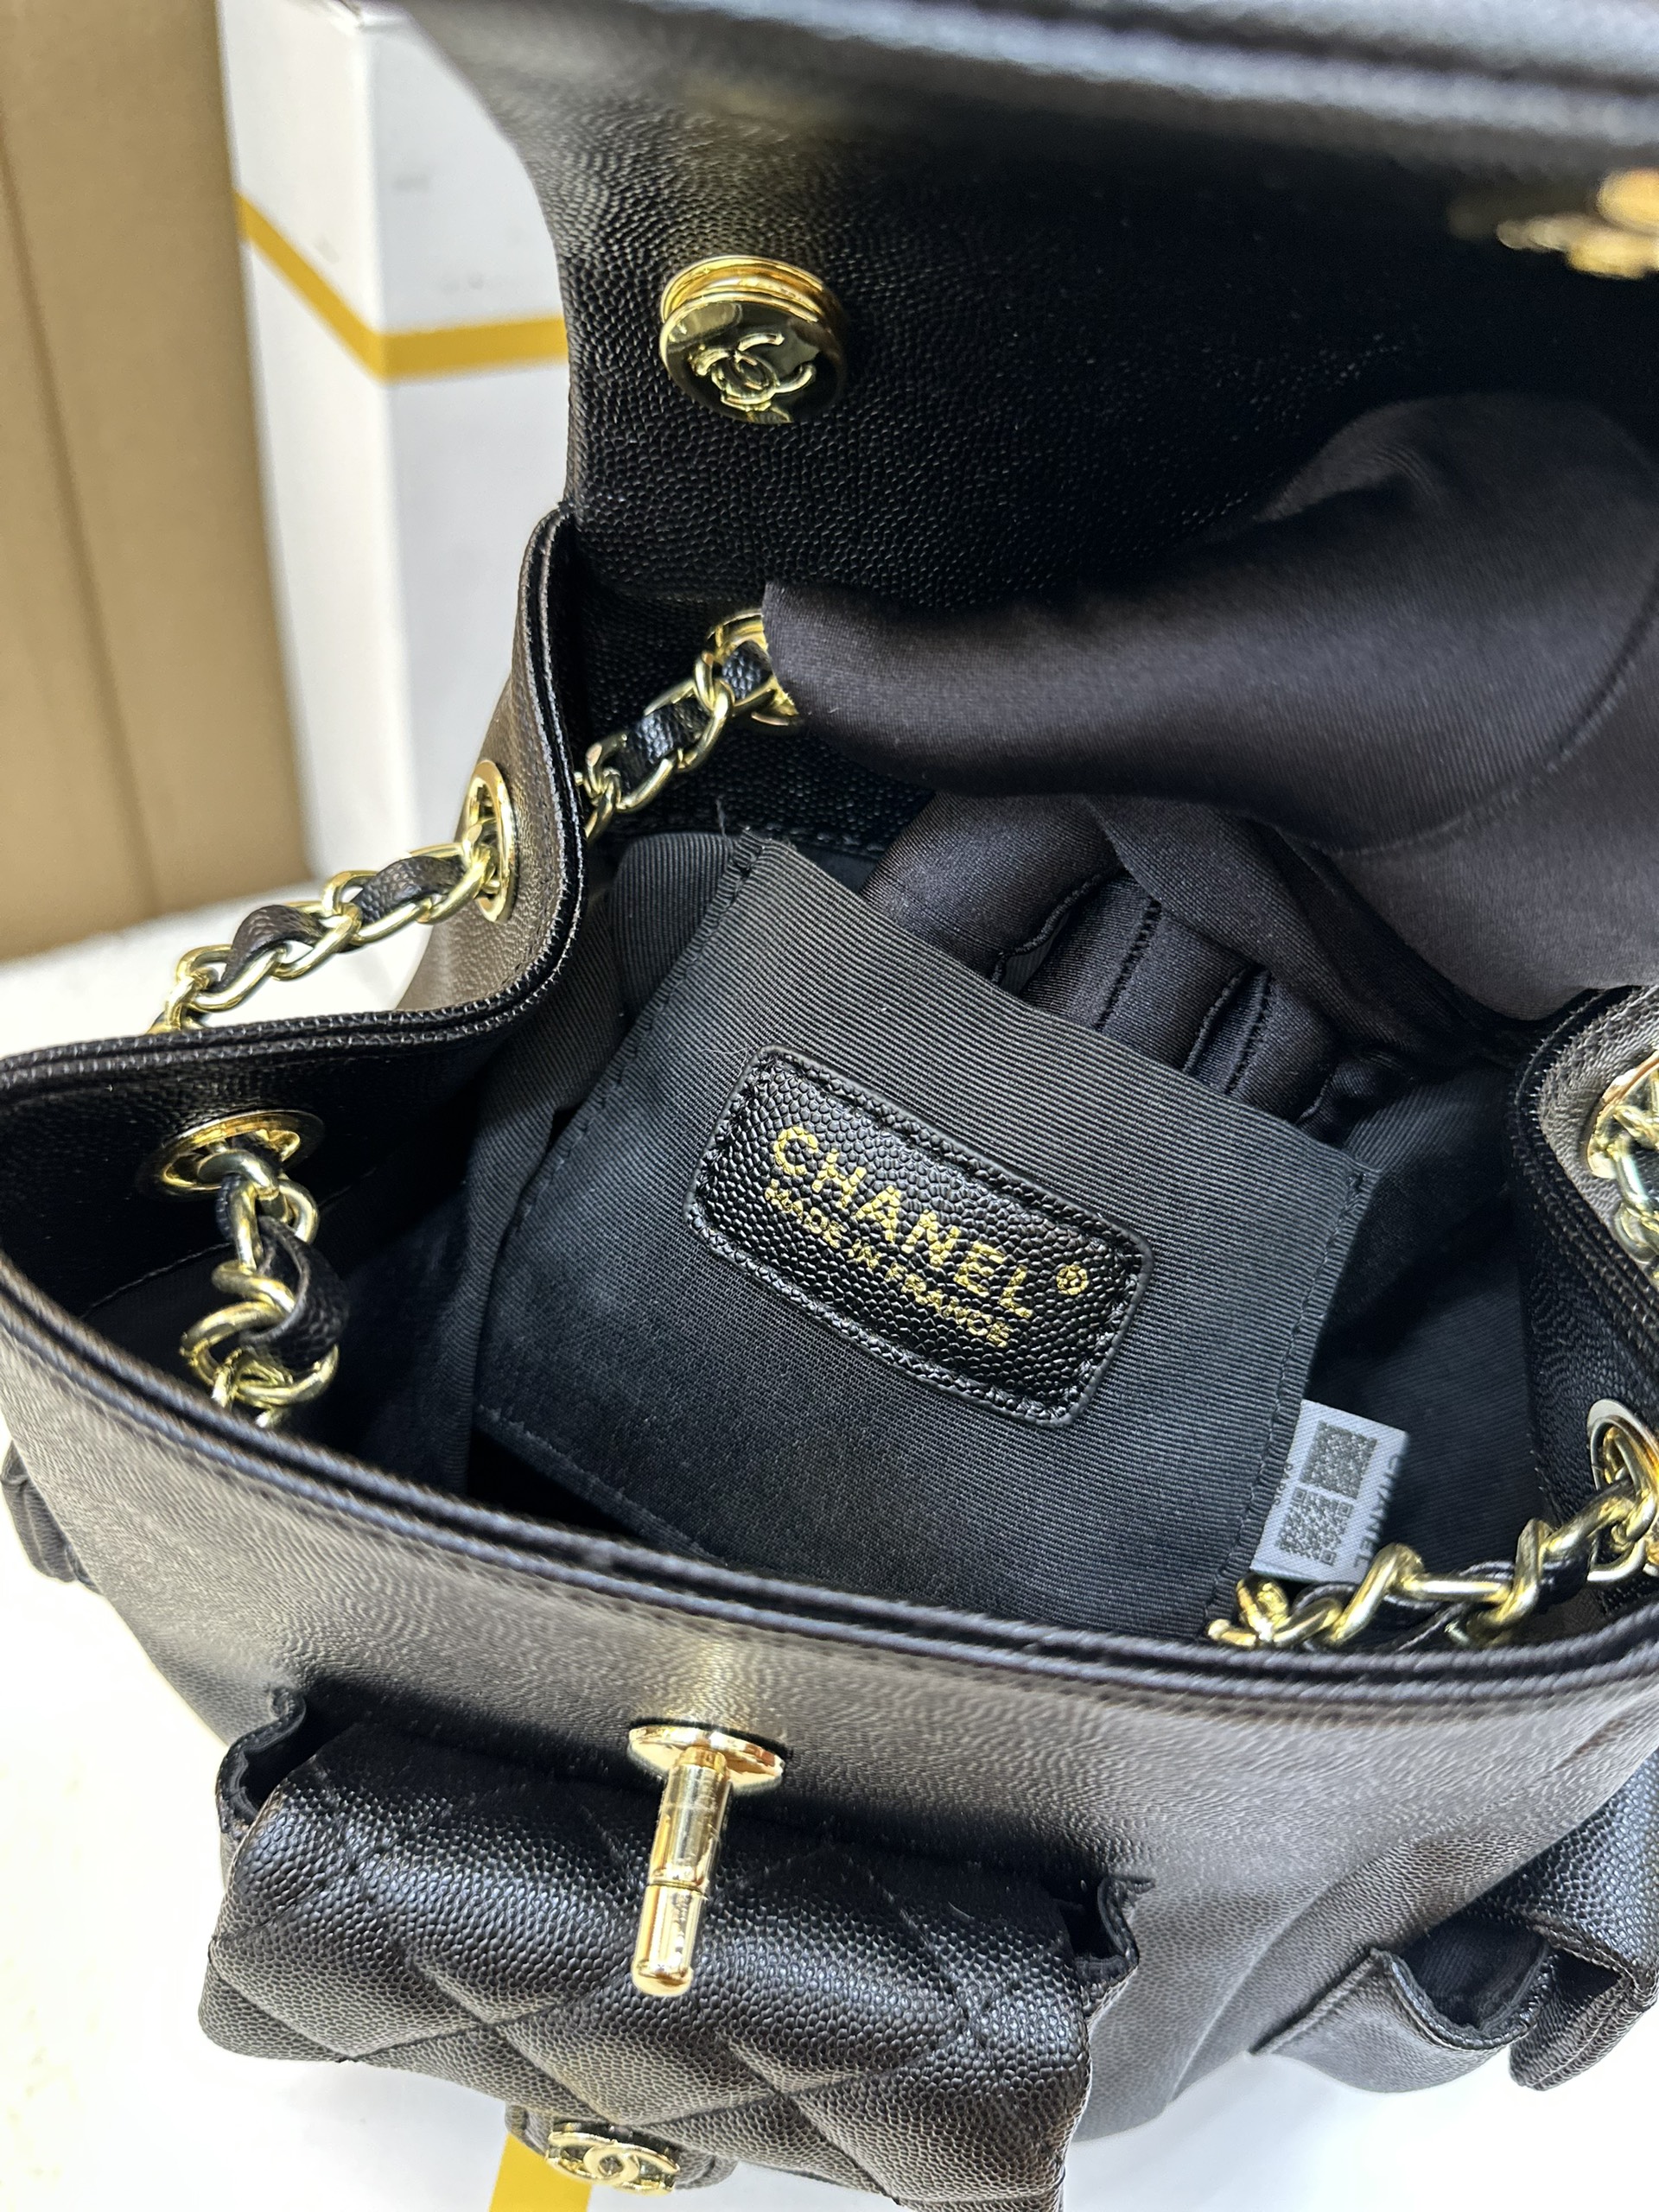 Balo Nhỏ Chanel - Chanel Small Backpack Super Màu Đen 2023 AS4399